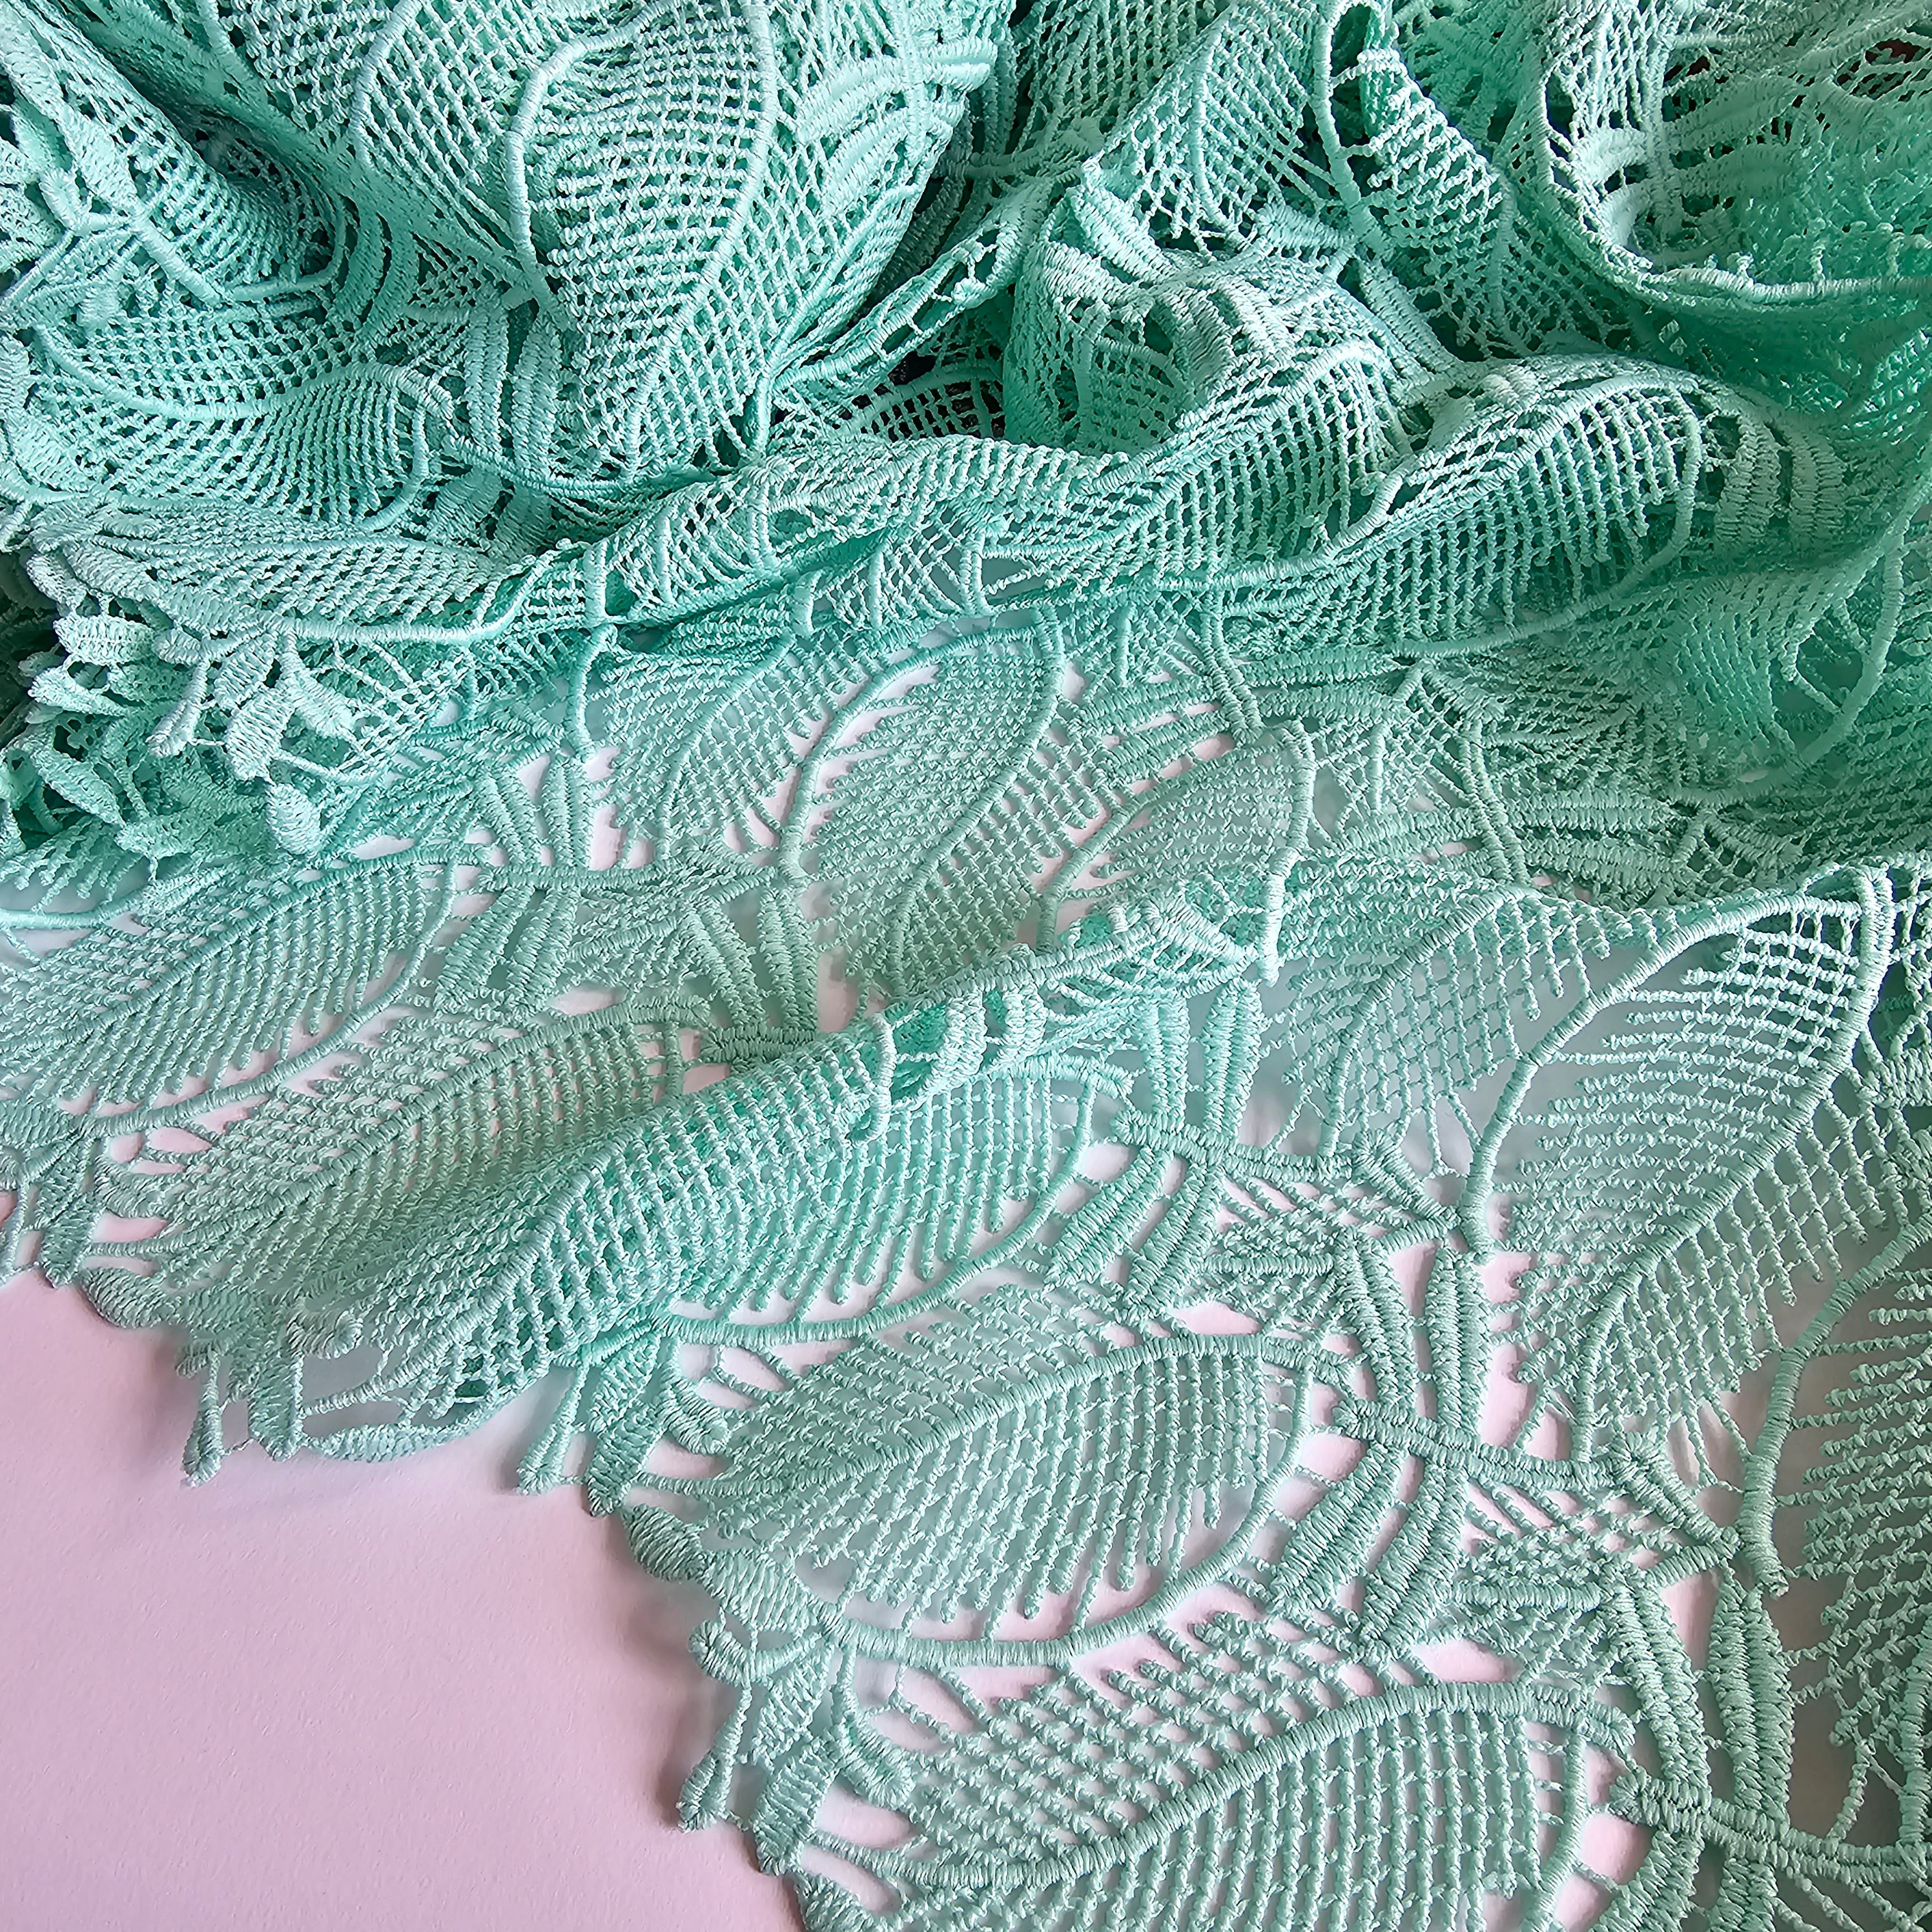 1.8 metres Remnant - The Lace Of My Dreams - Mint Leaves - Polyester